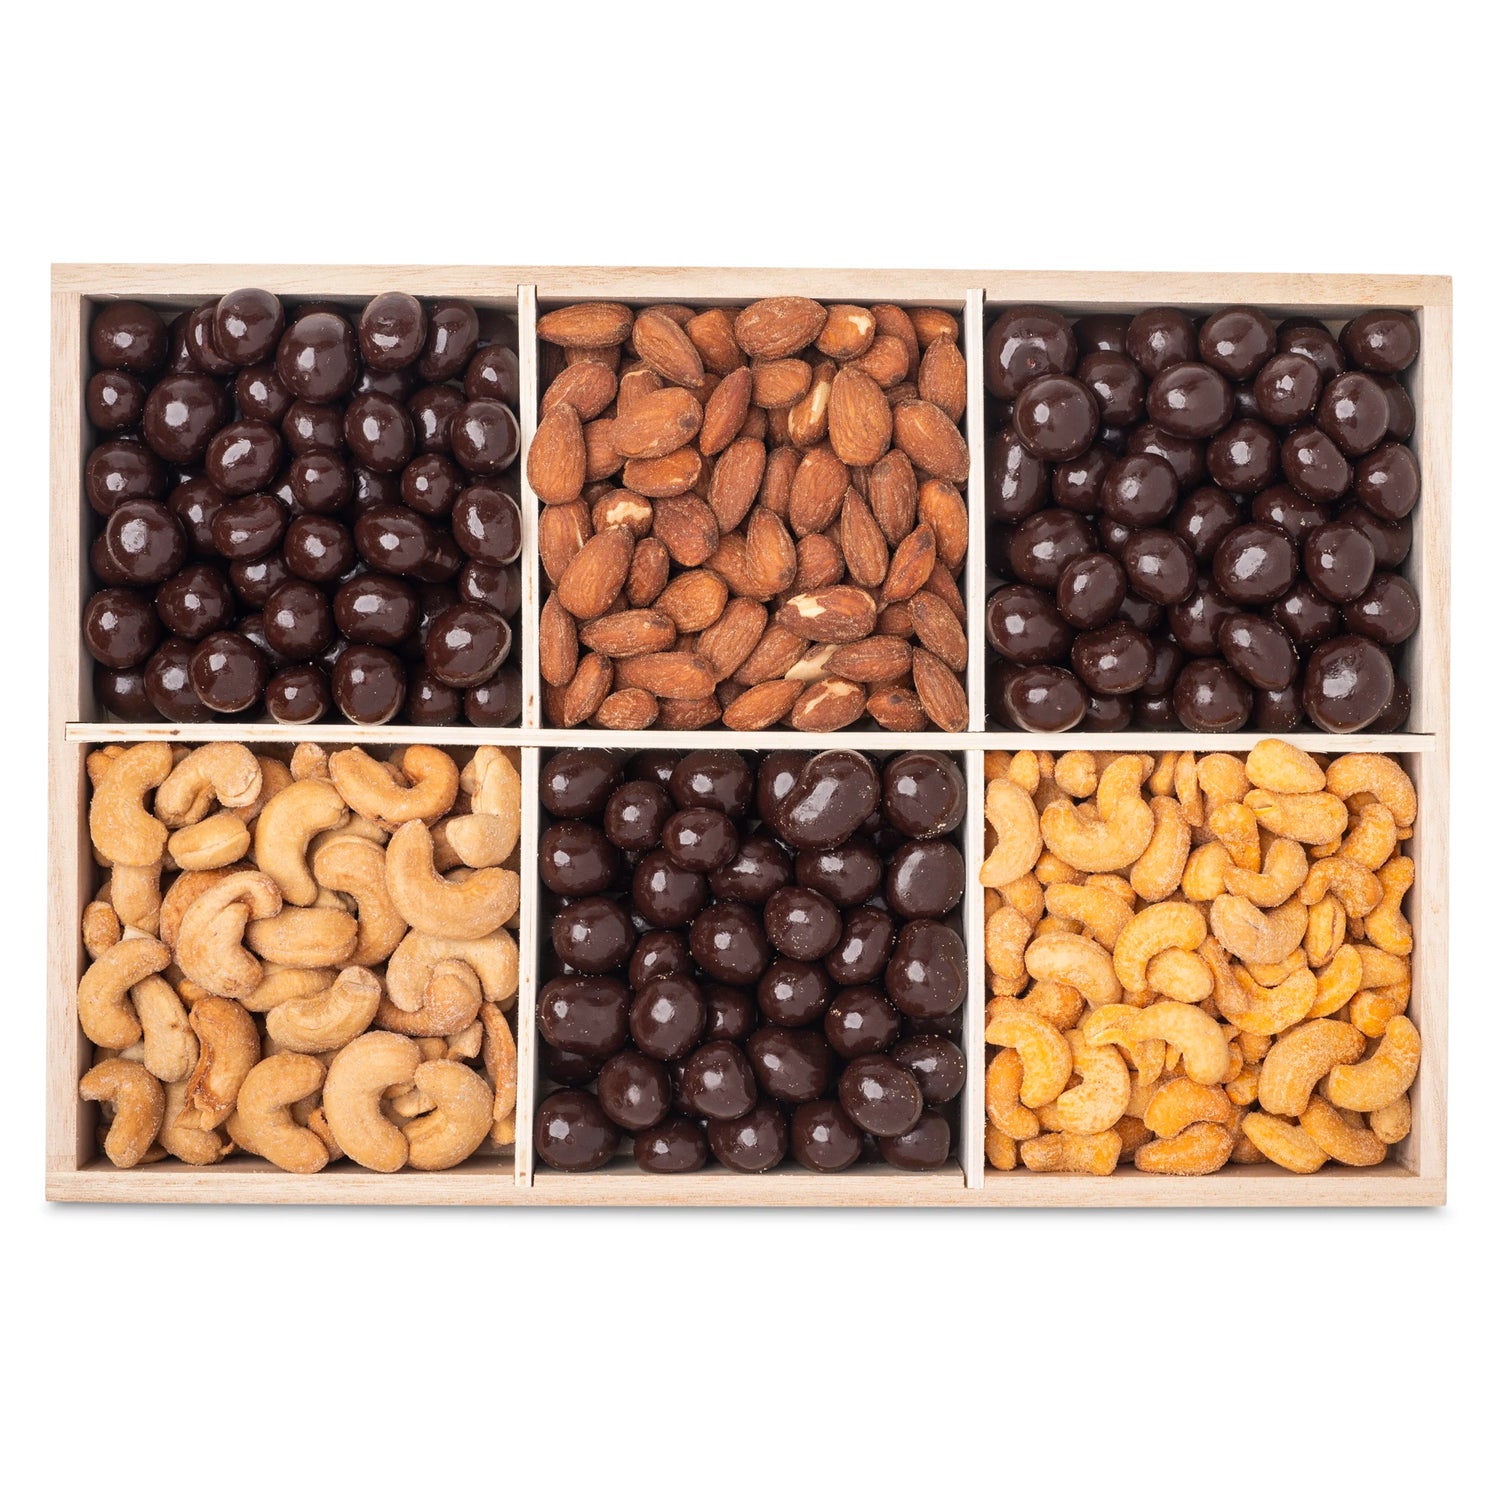 Chocolate & Nut/ Candy Platters